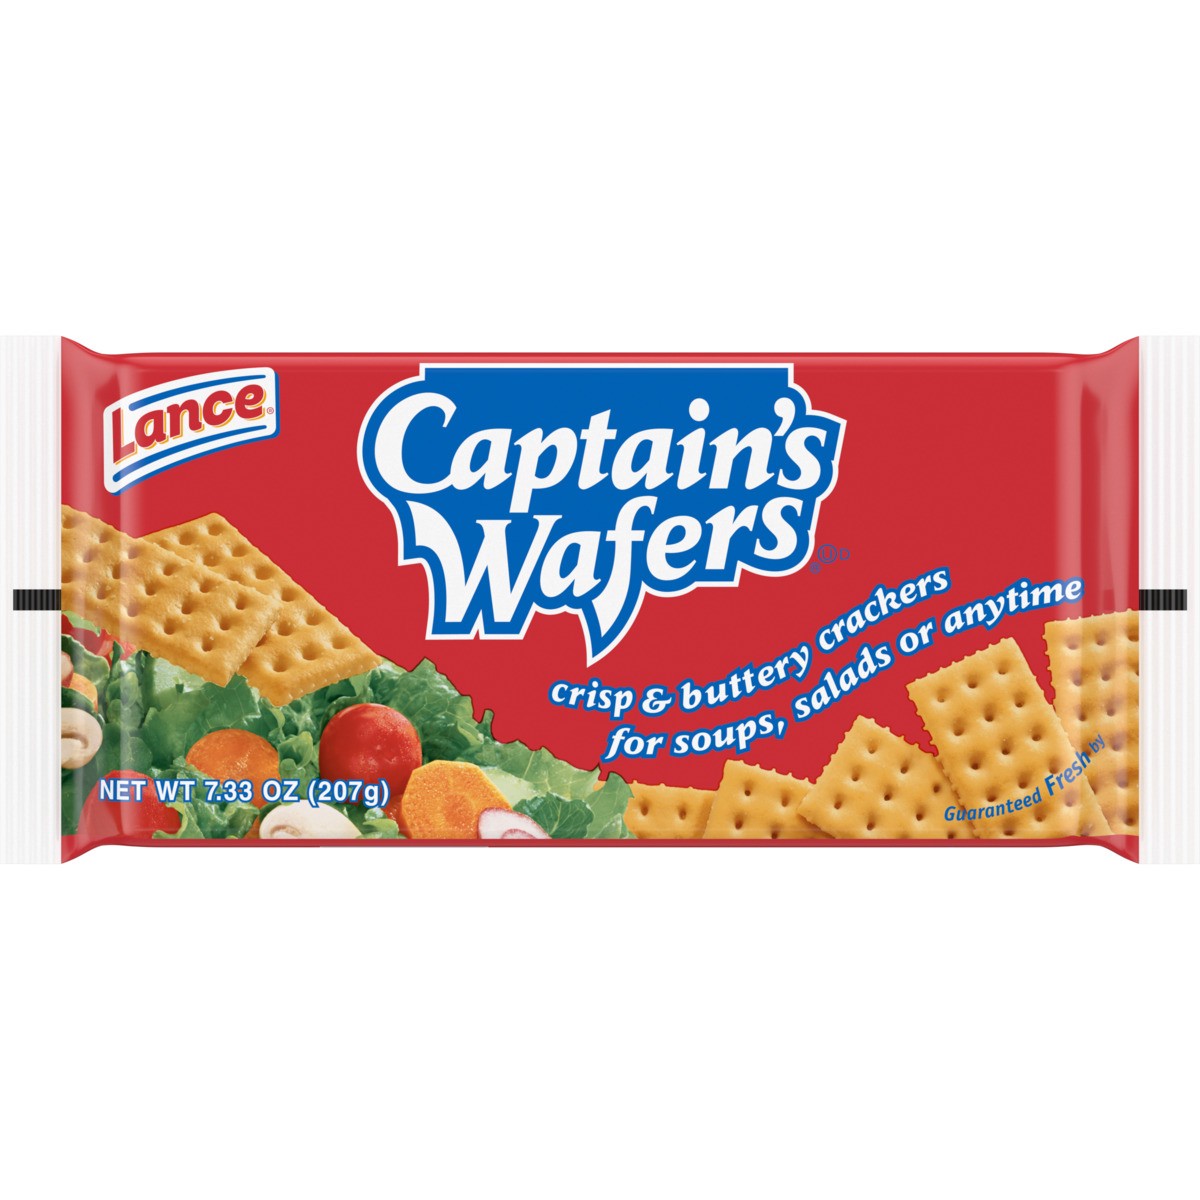 slide 3 of 9, Lance Captain's Wafers Crackers, 16 Ct, 7.33 oz